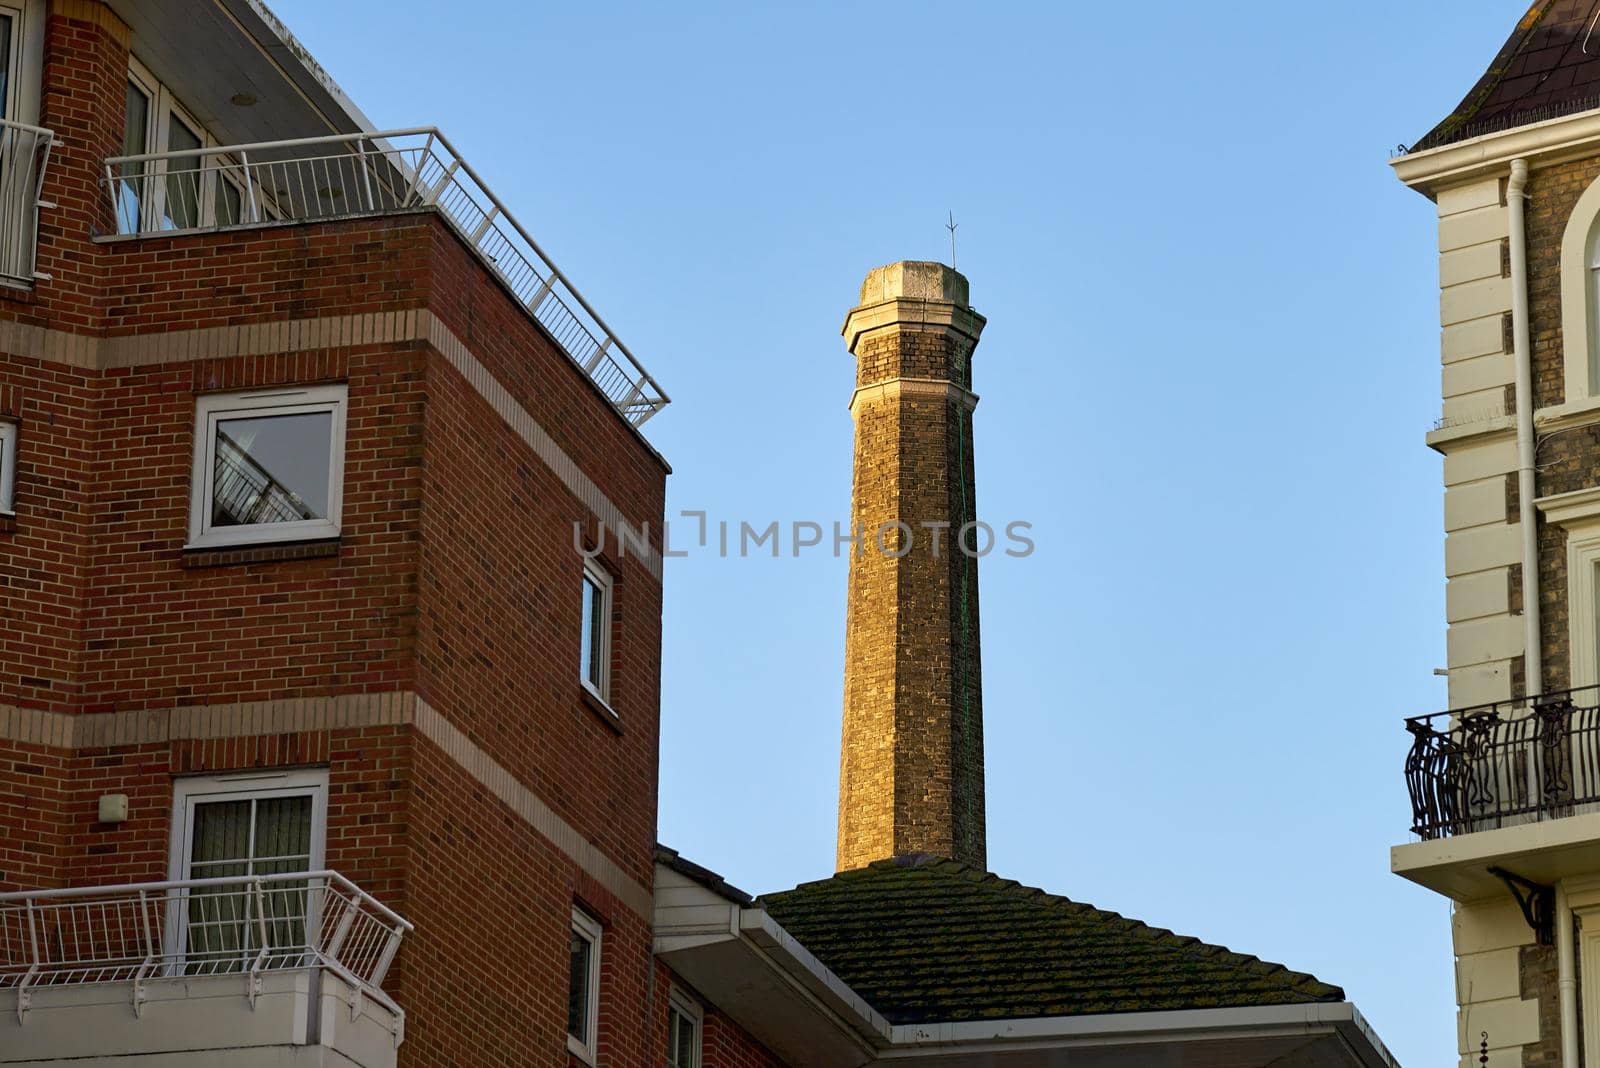 Broadstairs, United Kingdom - January 09, 2022: Chimney of the Grand Hotel in Broadstairs by ChrisWestPhoto